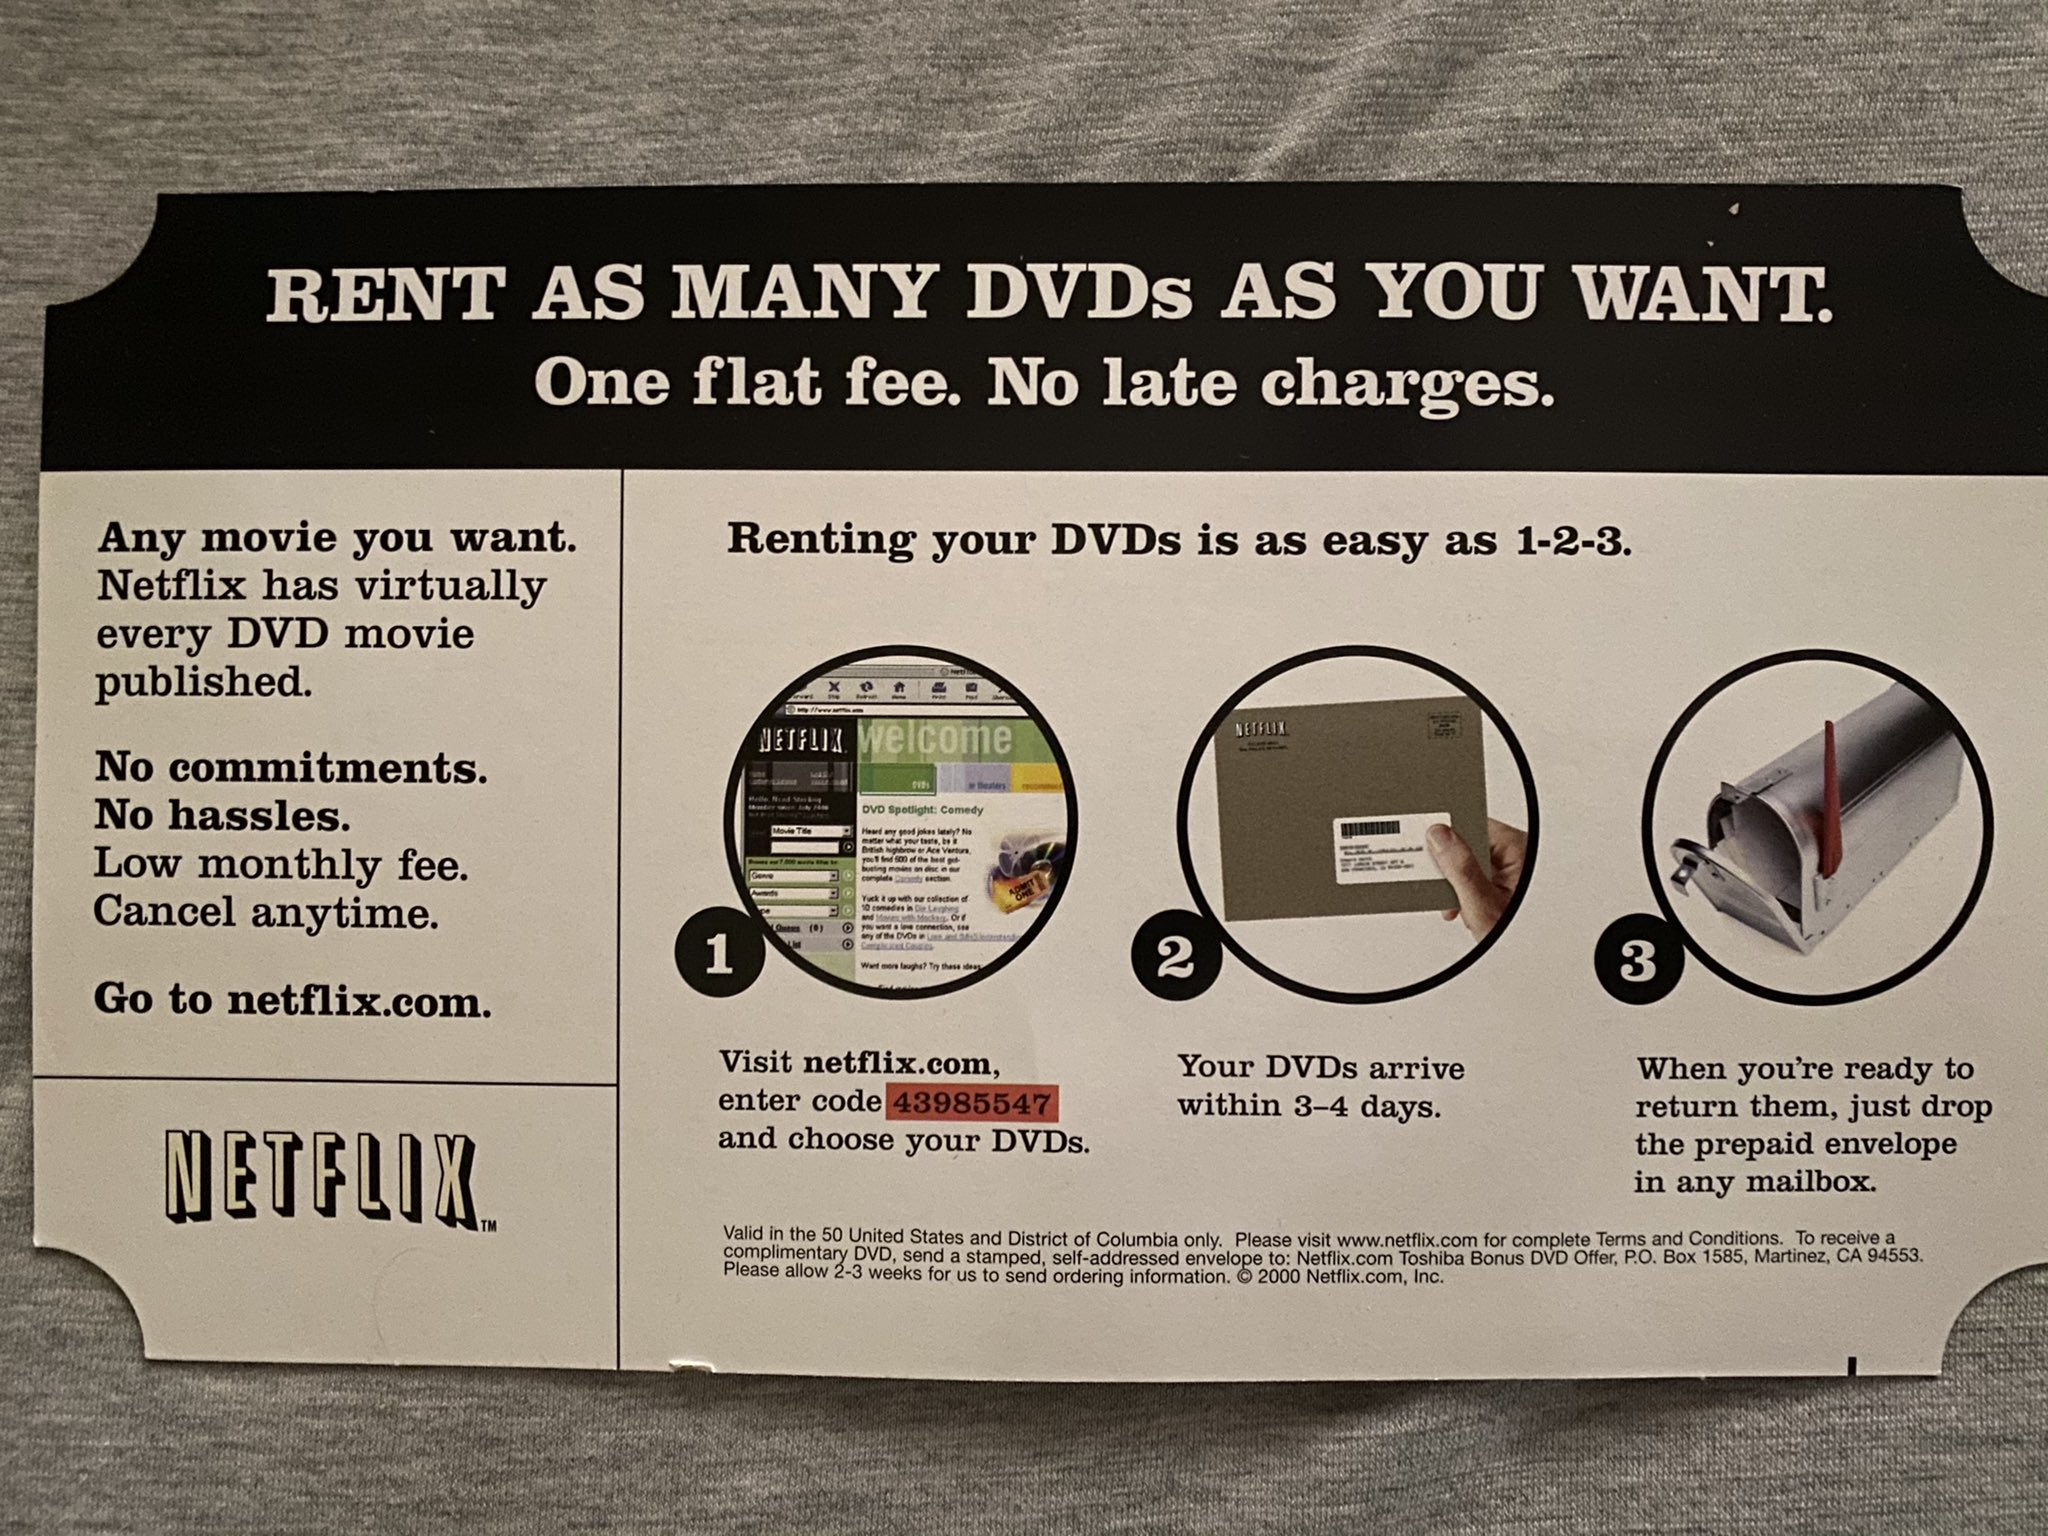 Kevinsmith Found An Advertisement While Going Through Some Old Stuff Apparently This Netflix Company Will Mail Dvds Right To Your House Me Myself I Like The Ritual Of Going To